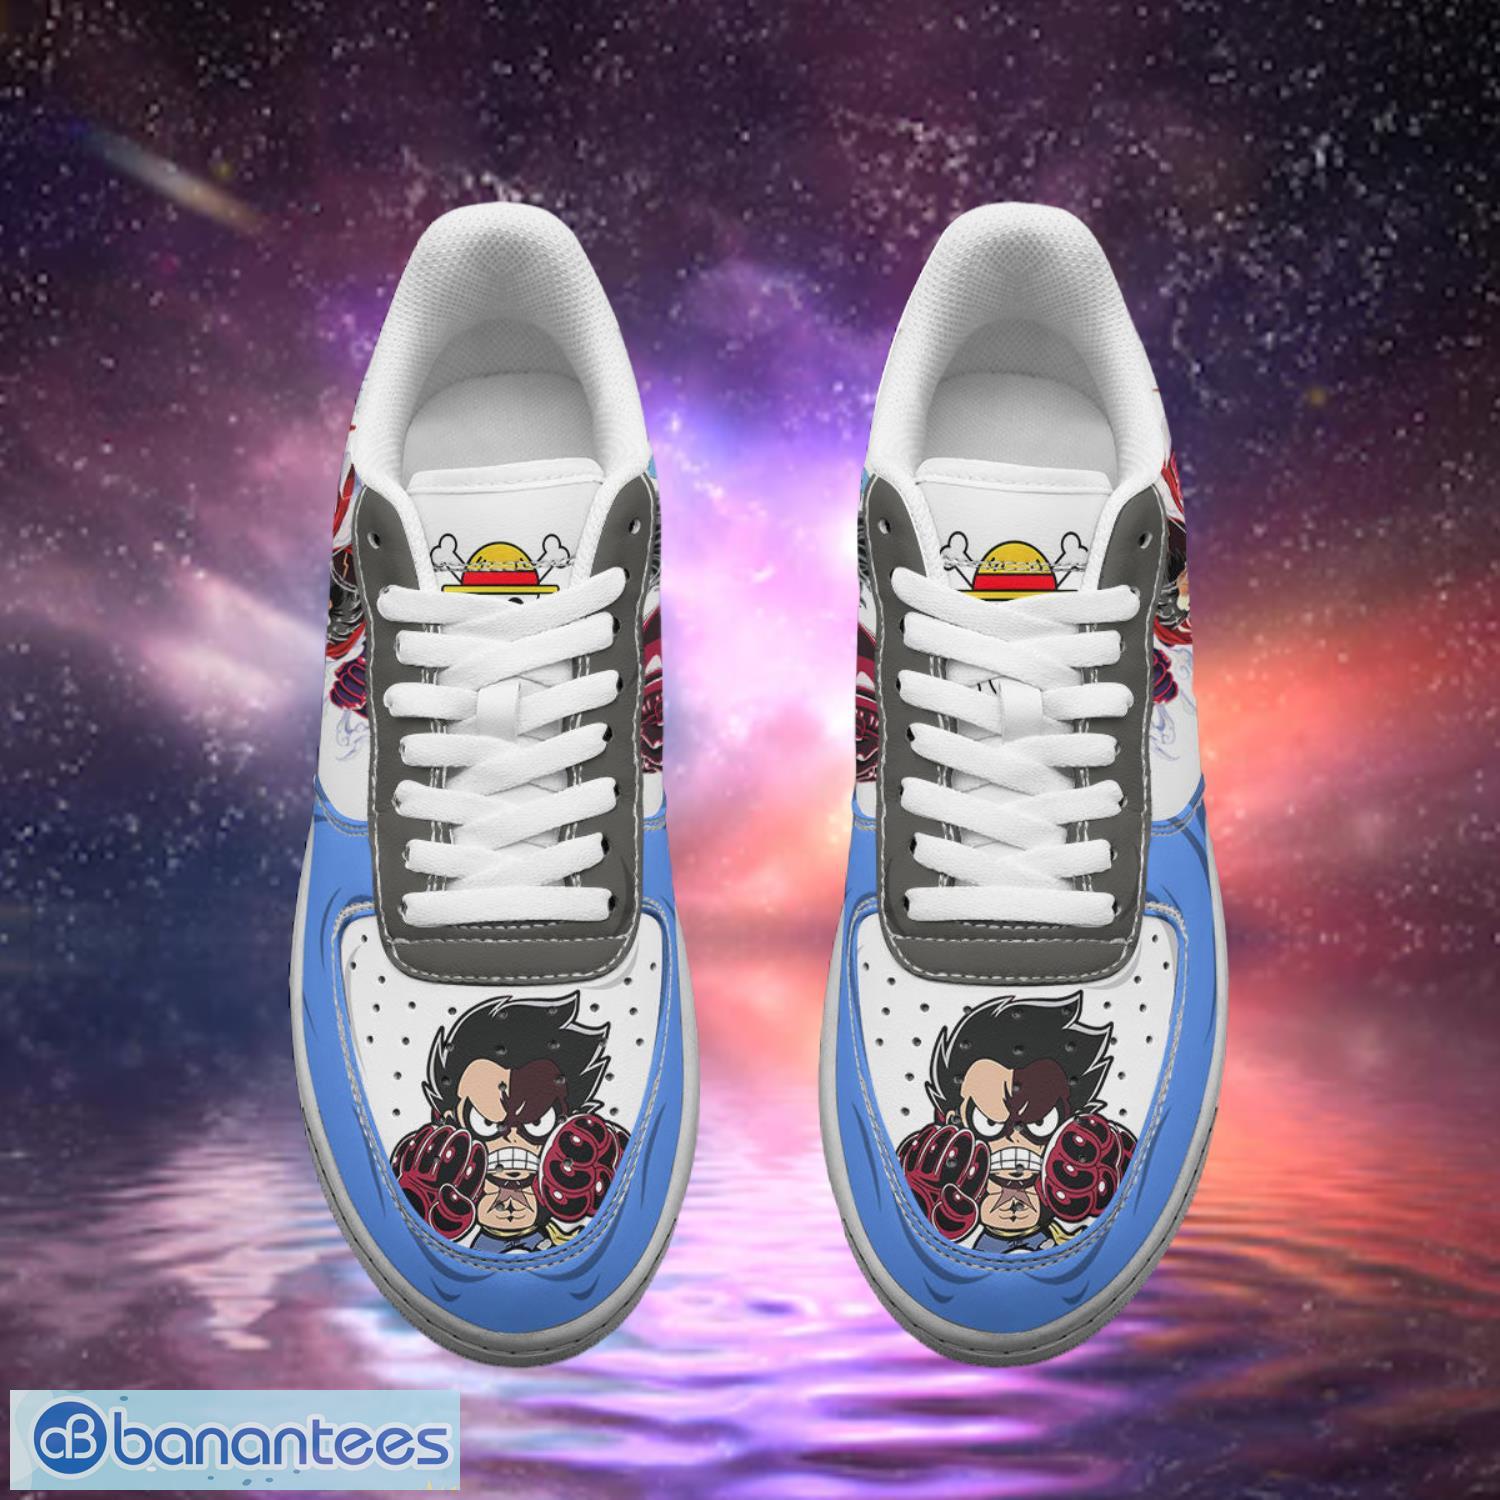 One Piece Monkey D. Luffy Gear 4 Air Sneakers Custom Anime Shoes Product Photo 2